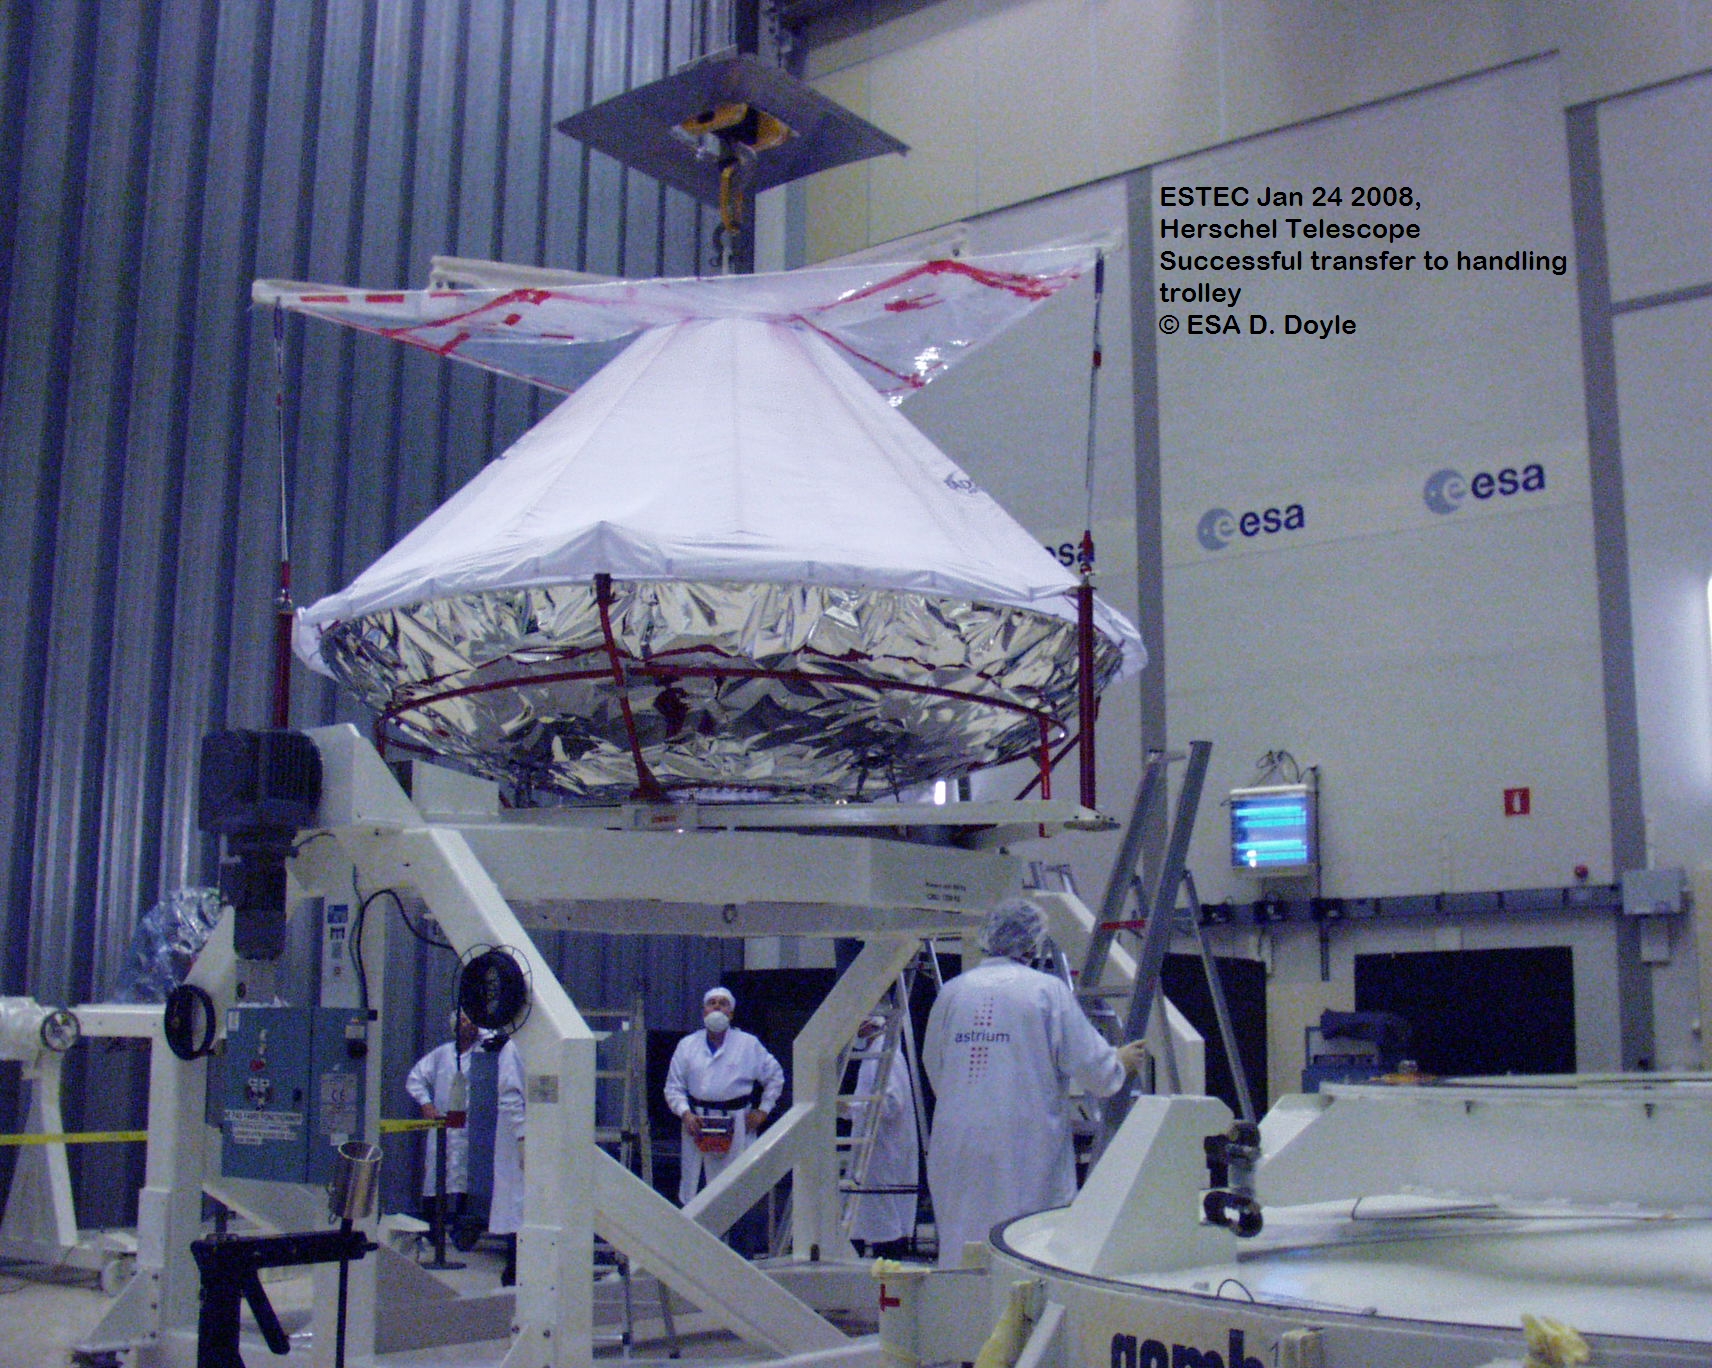 Herschel Telescope moved out of its transport container.